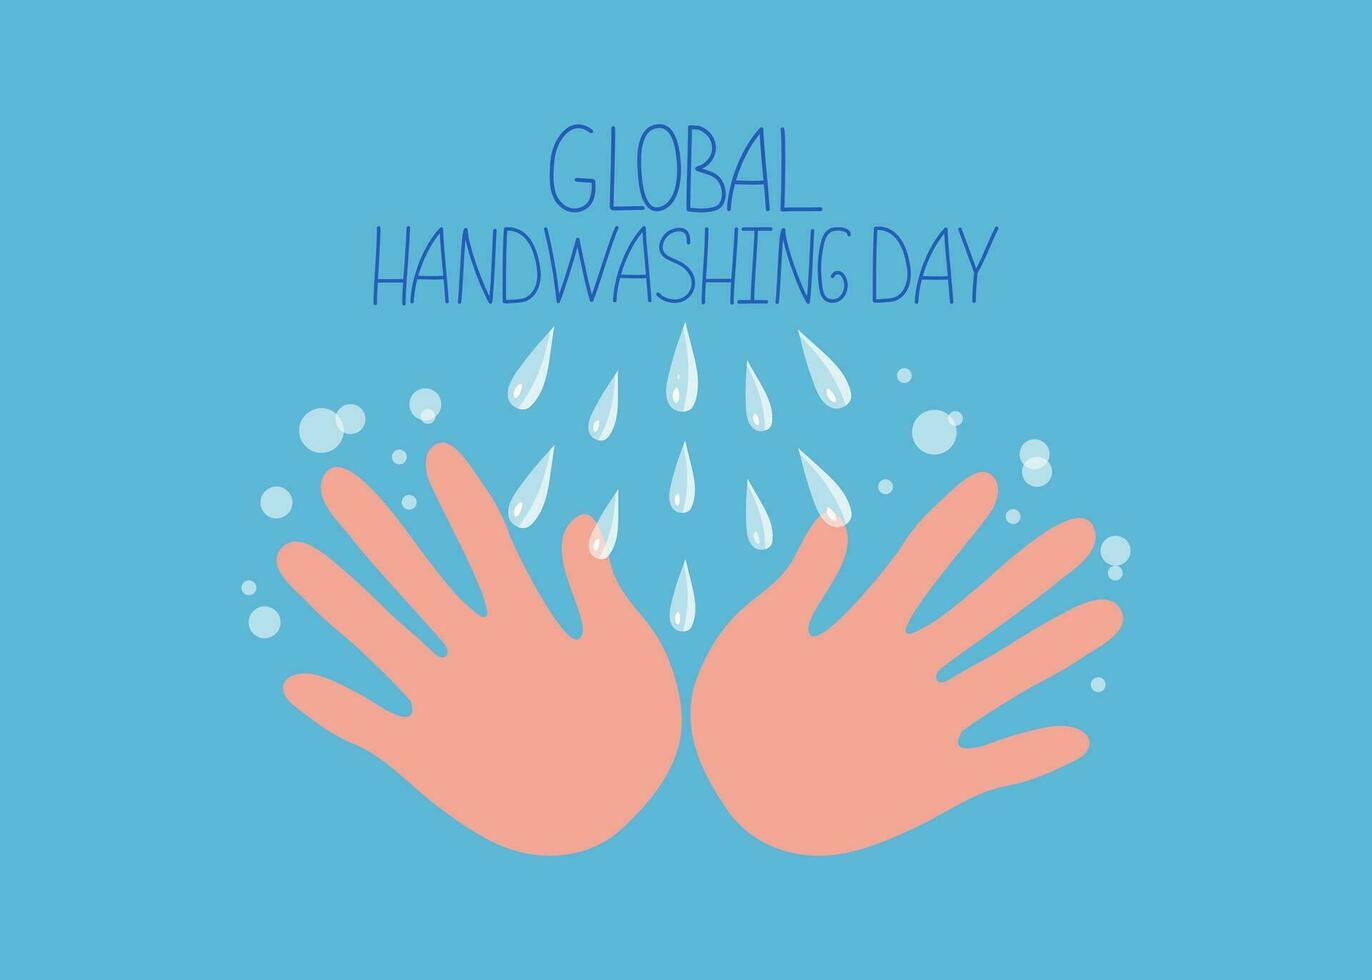 Written by hand. World handwashing day. Human hands, tap water, pouring water. Washing hands. Calligraphy text. Vector illustration.